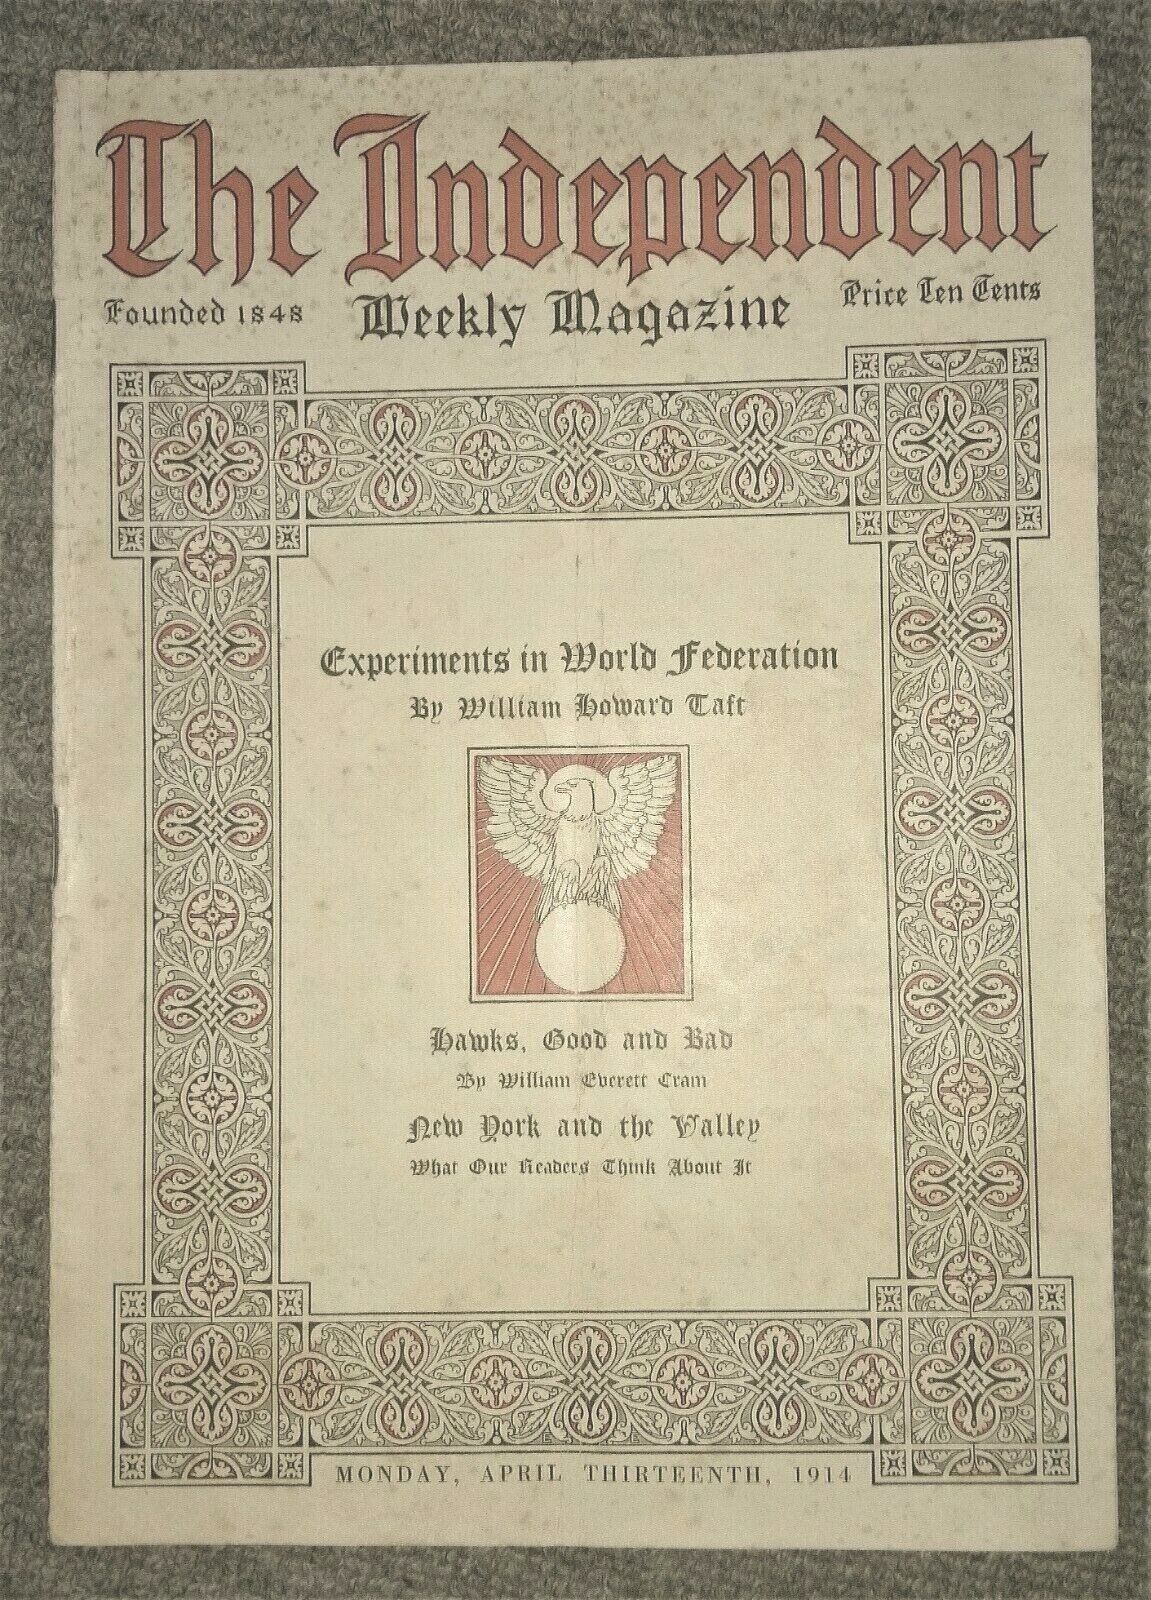 THE INDEPENDENT WEEKLY MAGAZINE APRIL 13, 1914